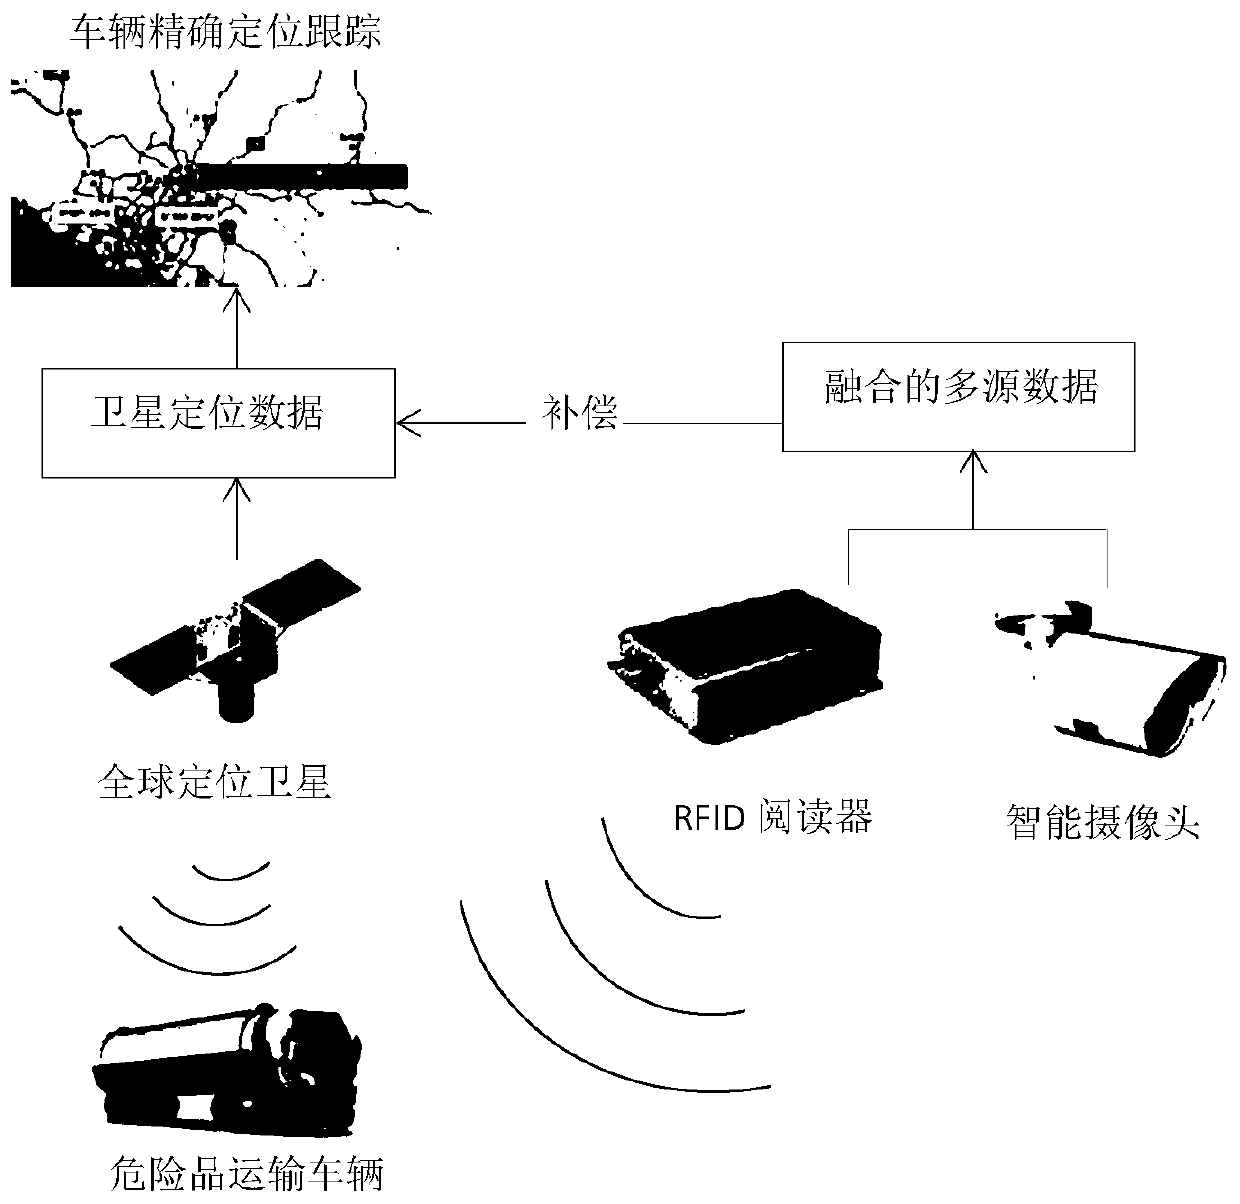 Dangerous goods transportation vehicle prevention tracking system and method based on multi-source data fusion